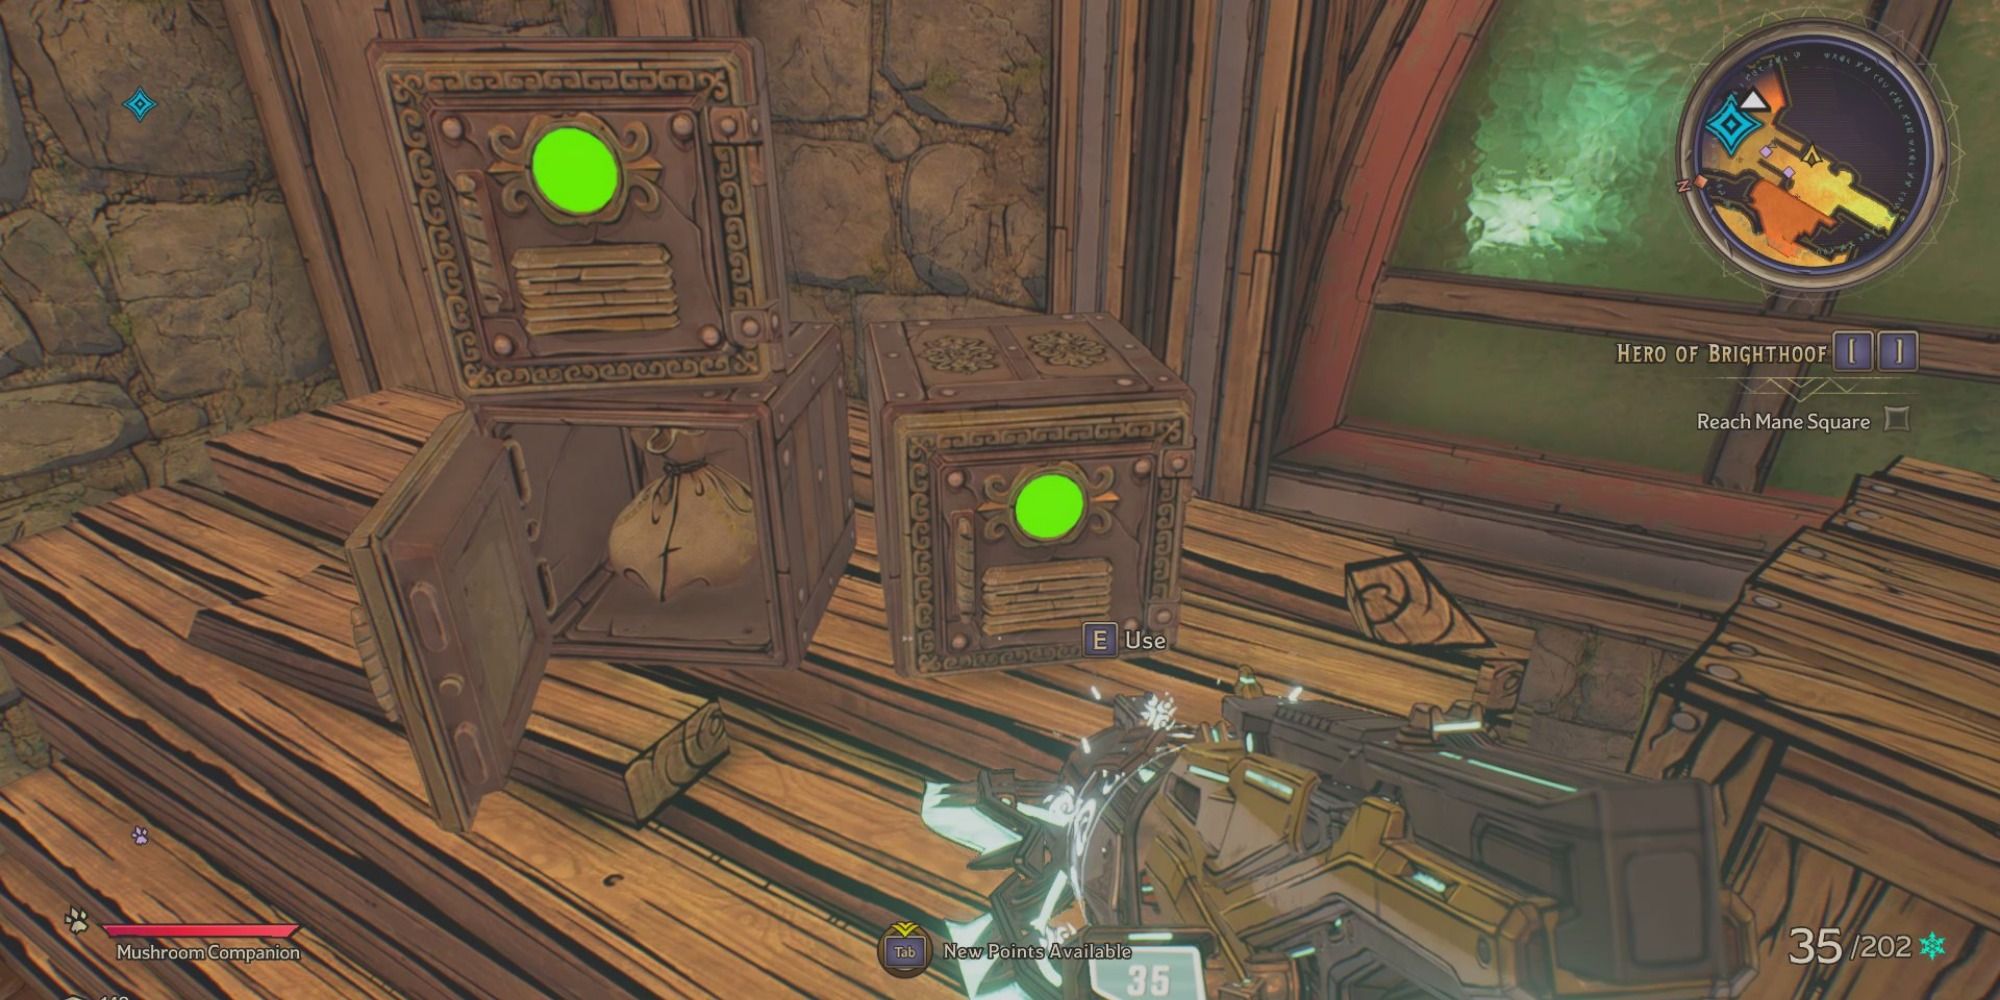 A stack of loot crates sits on wooden pallets in Brighthoof